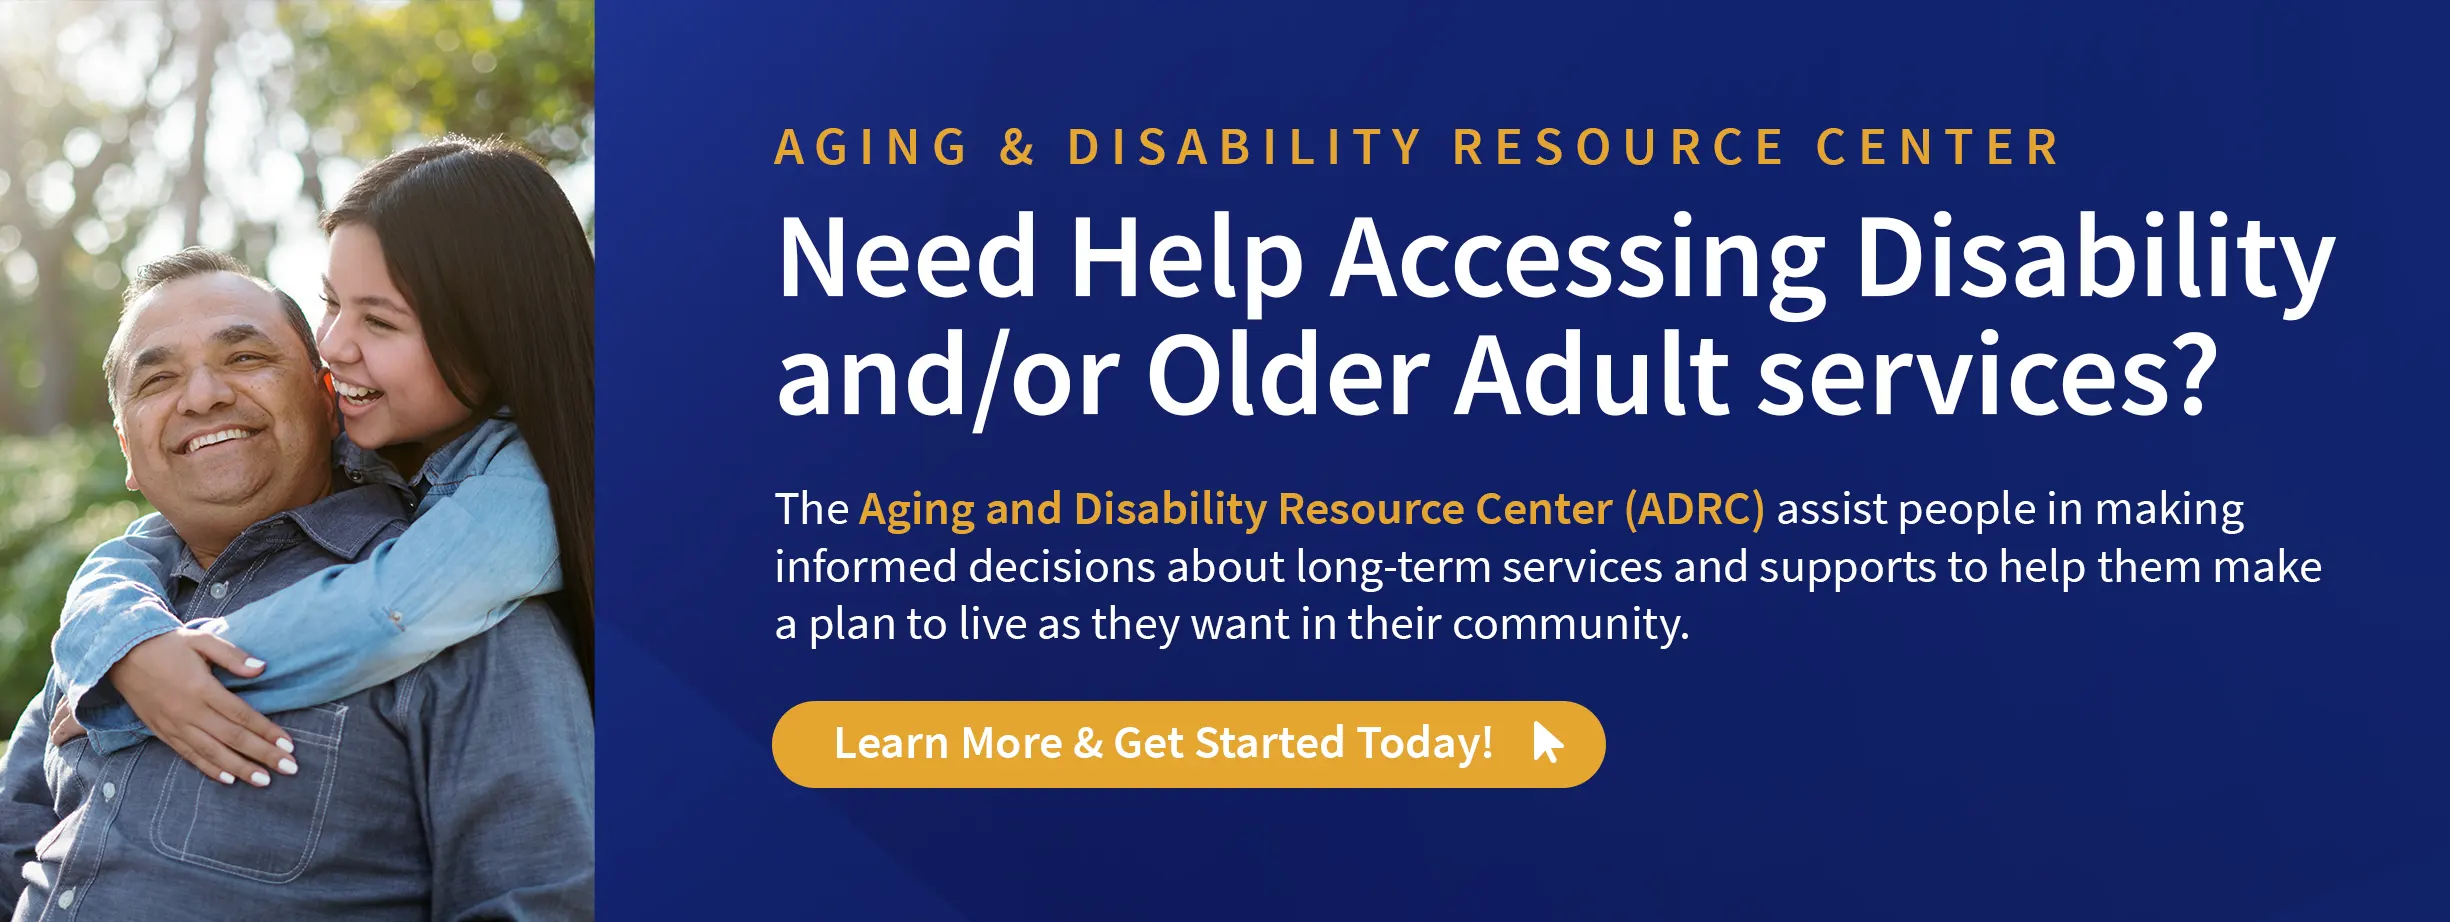 Aging & Disability Resource Center – Need Help Accessing Disability and/or Older Adult services? The Aging and Disability Resource Center (ADRC) assist people in making informed decisions about long-term services and supports to help them make a plan to live as they want in their community. Learn More & Get Started Today!